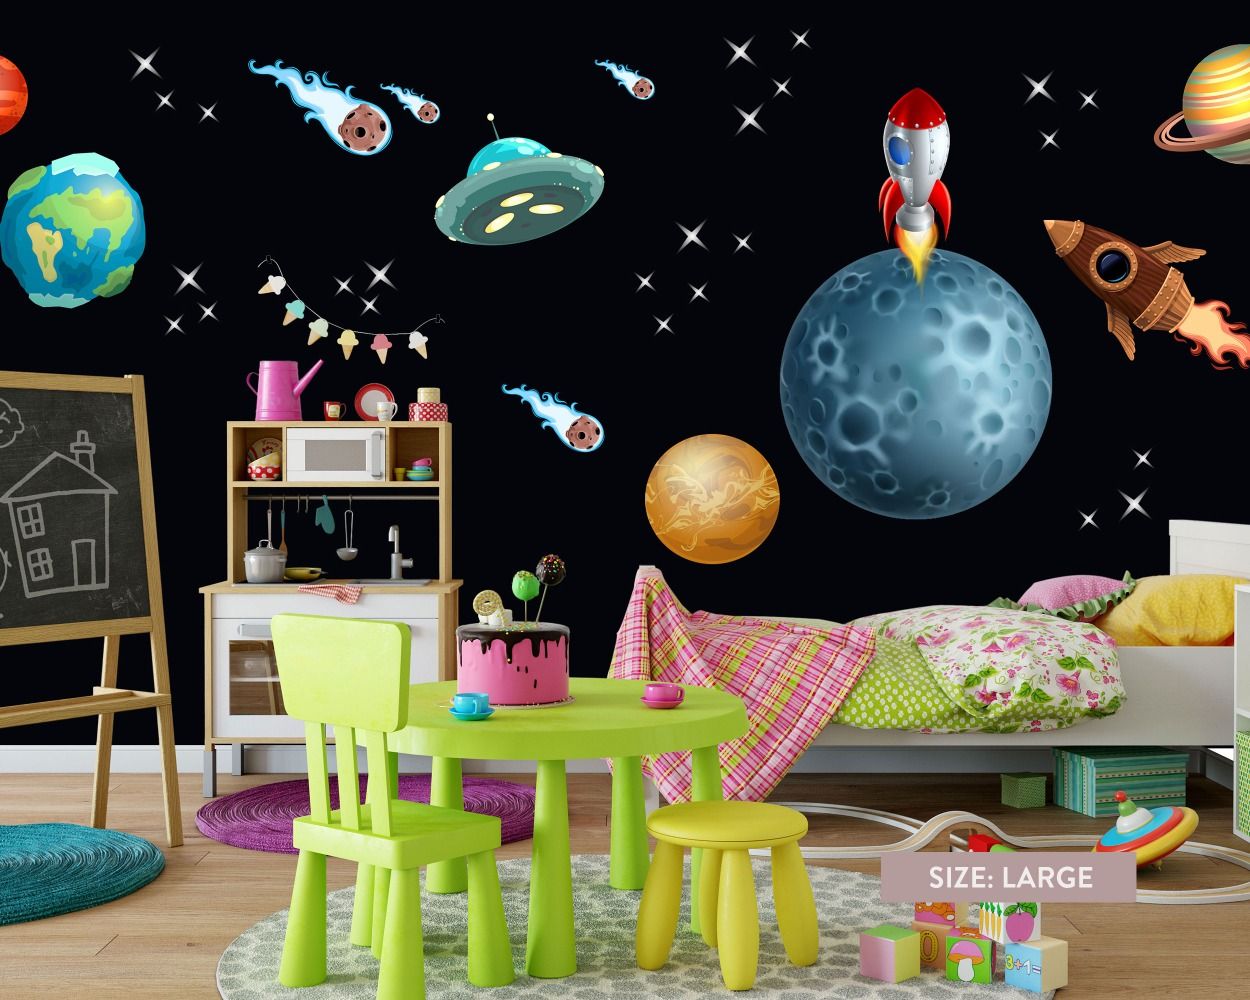 Best Beautiful Solar System Astronaut Vinyl Wall Stickers for Room Wall Decor